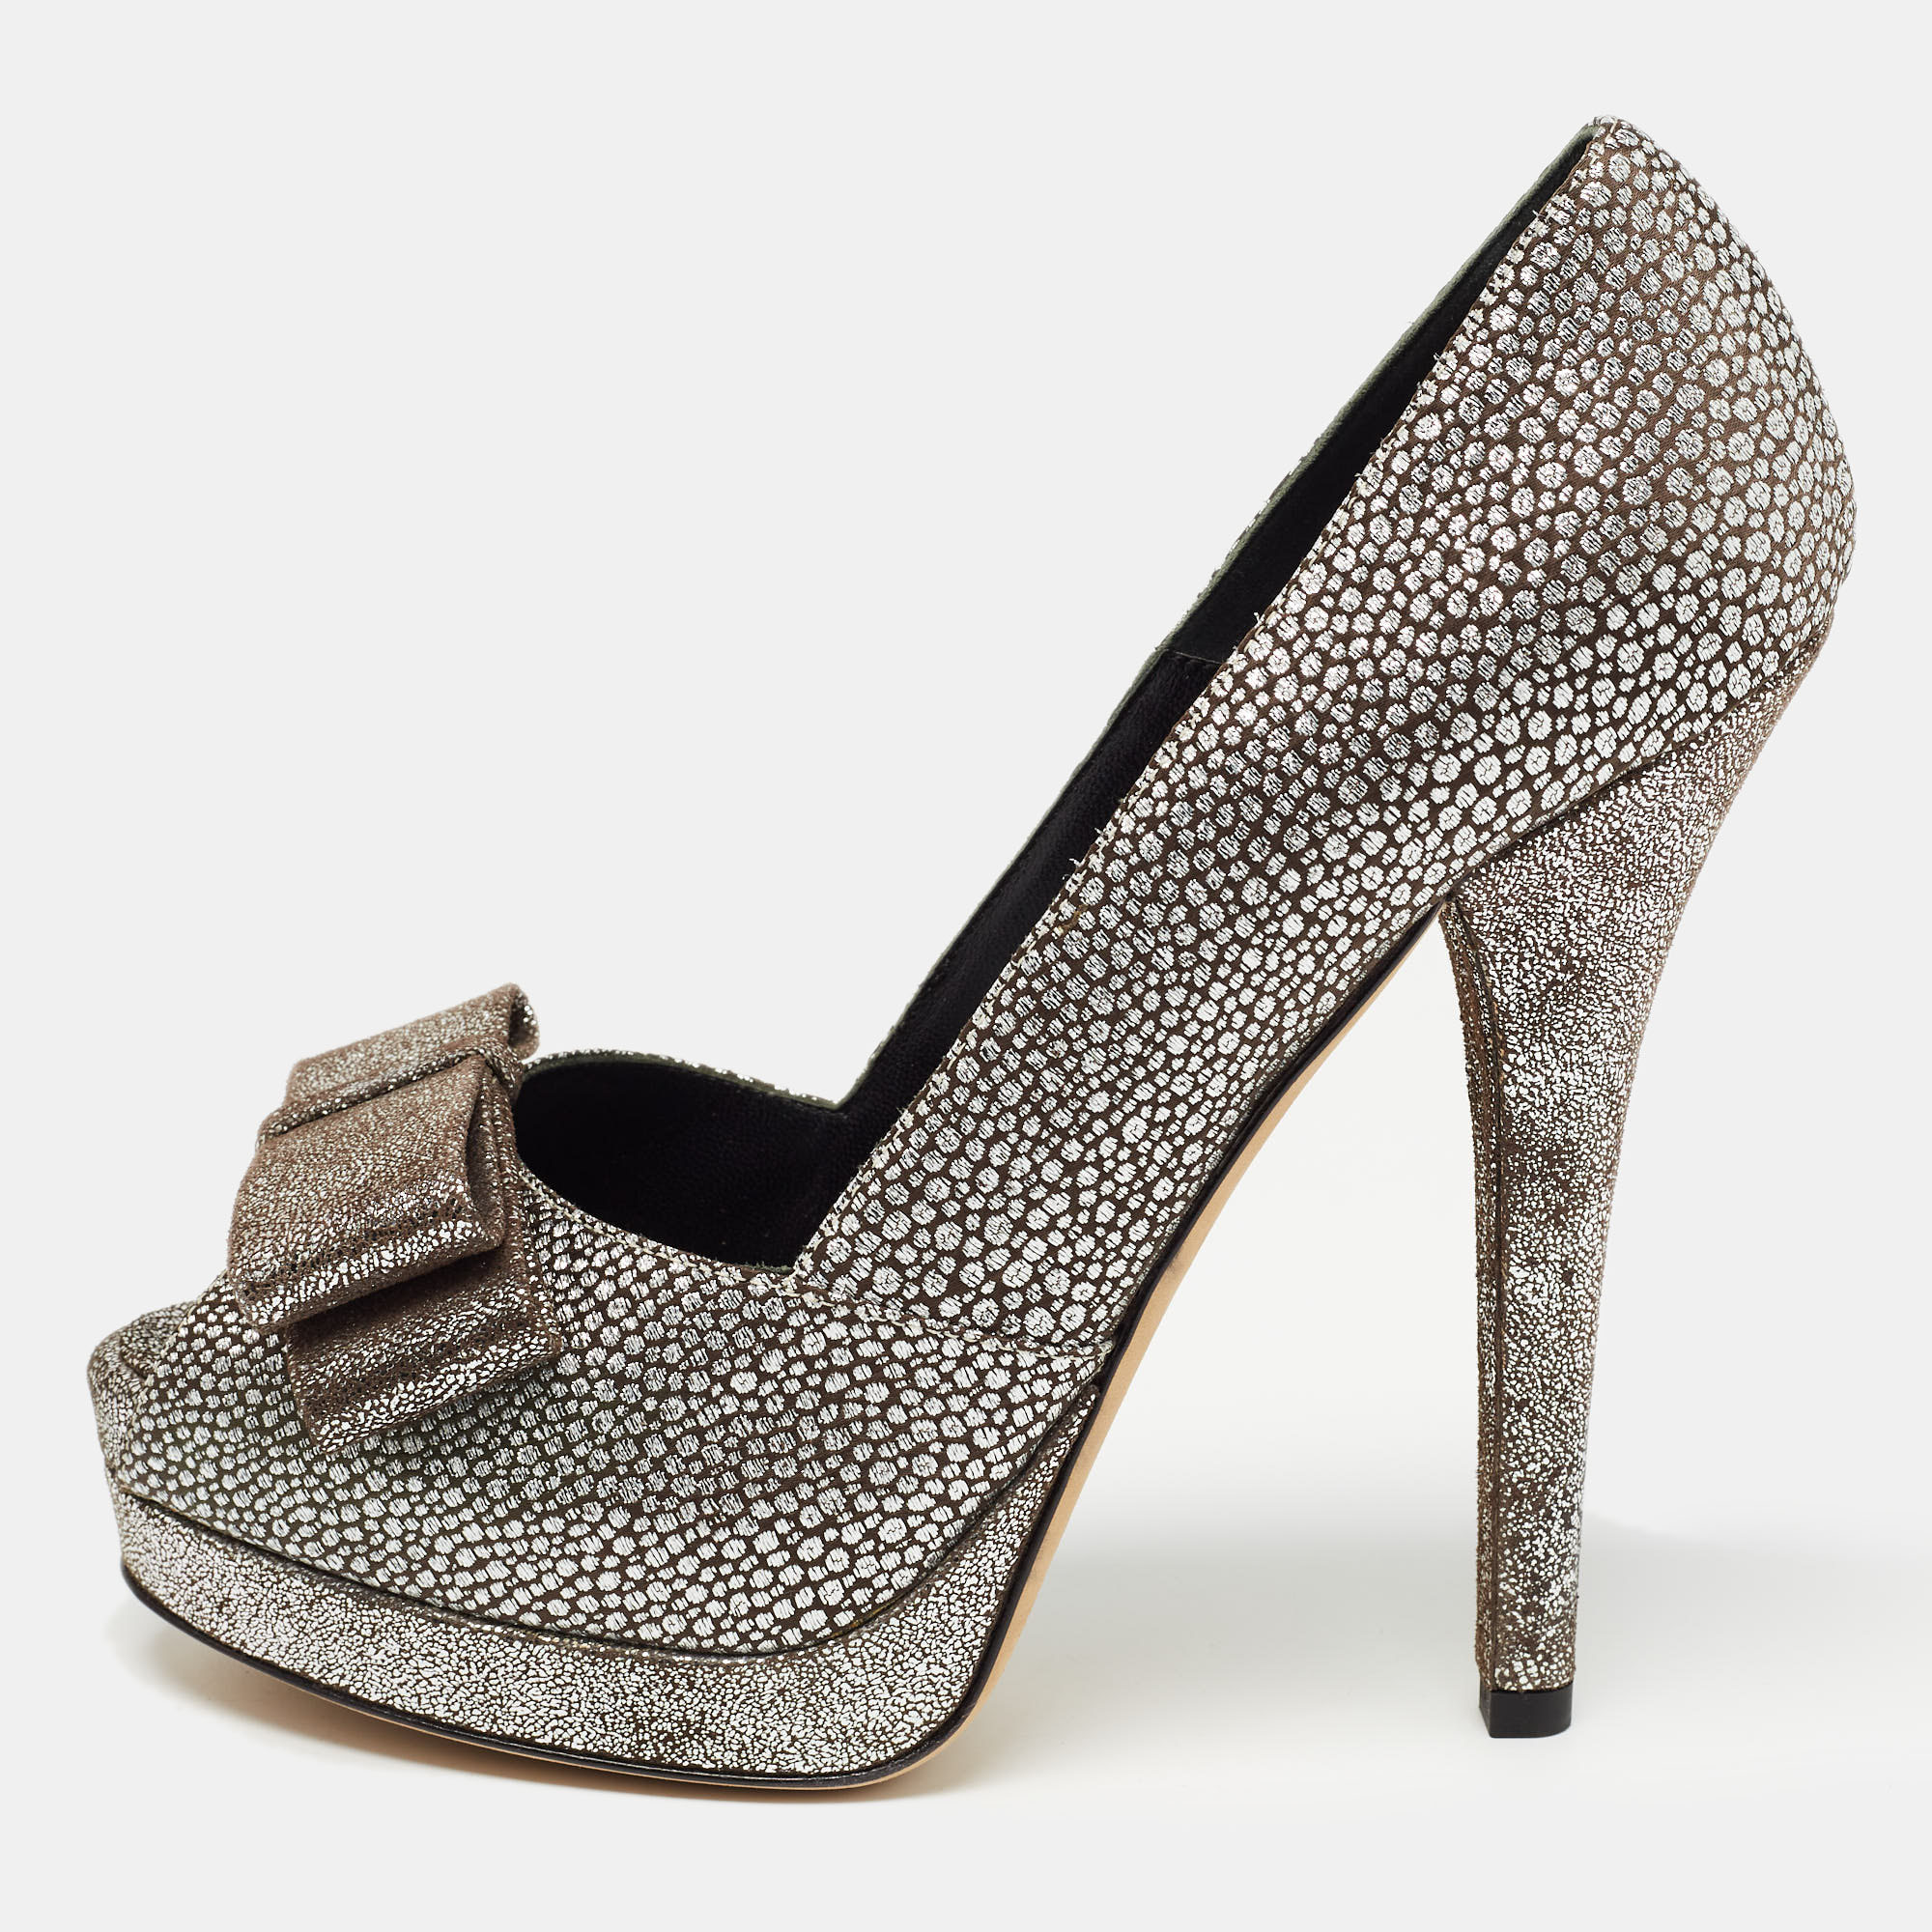 Fendi silver/grey brocade fabric and suede bow open toe platform pumps size 40